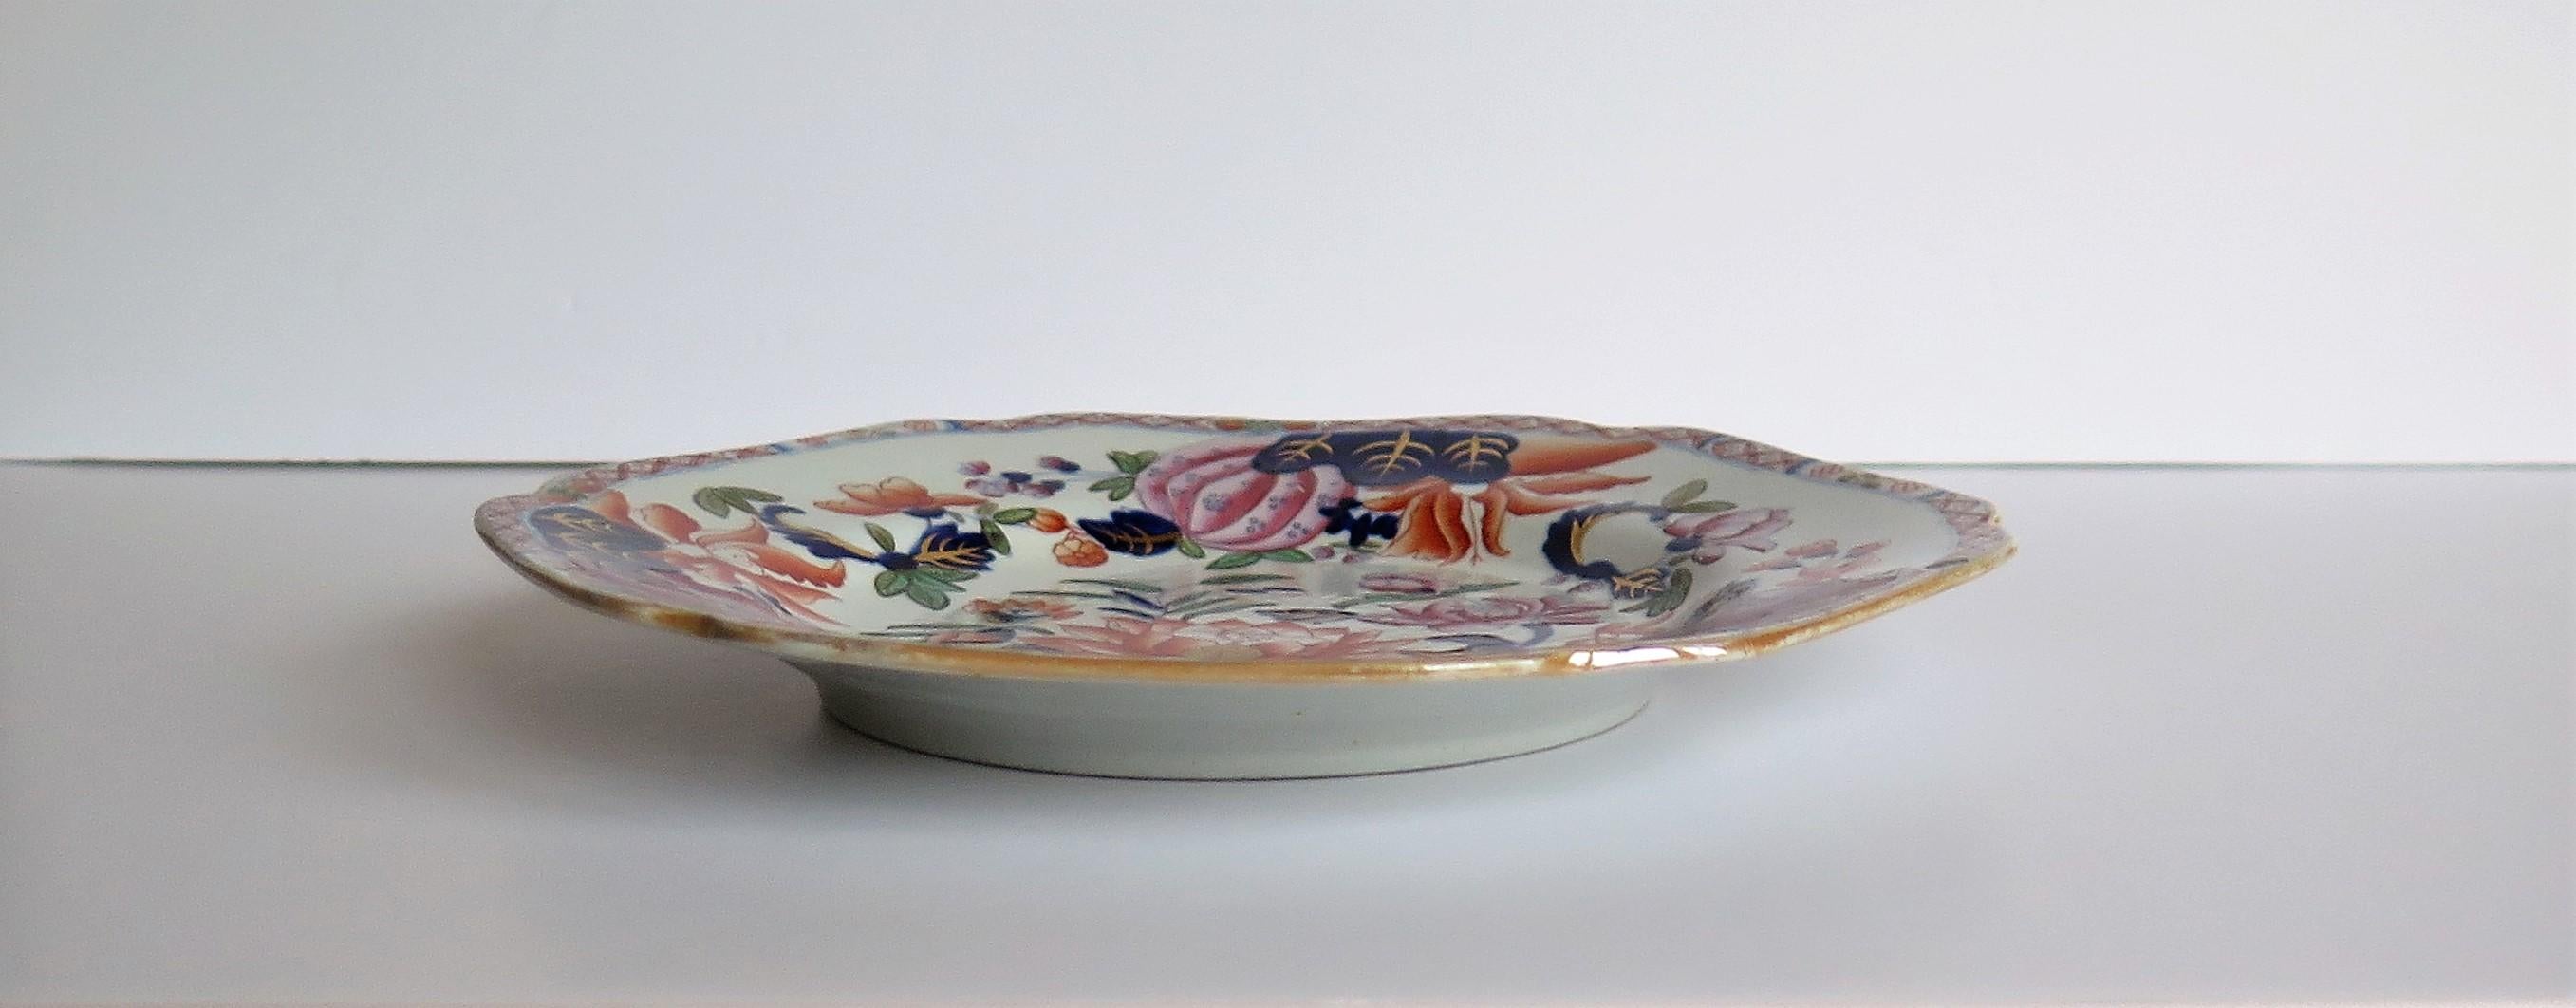 Hand-Painted Early Hicks and Meigh Ironstone Plate or Dish in Water Lily Pattern No.5